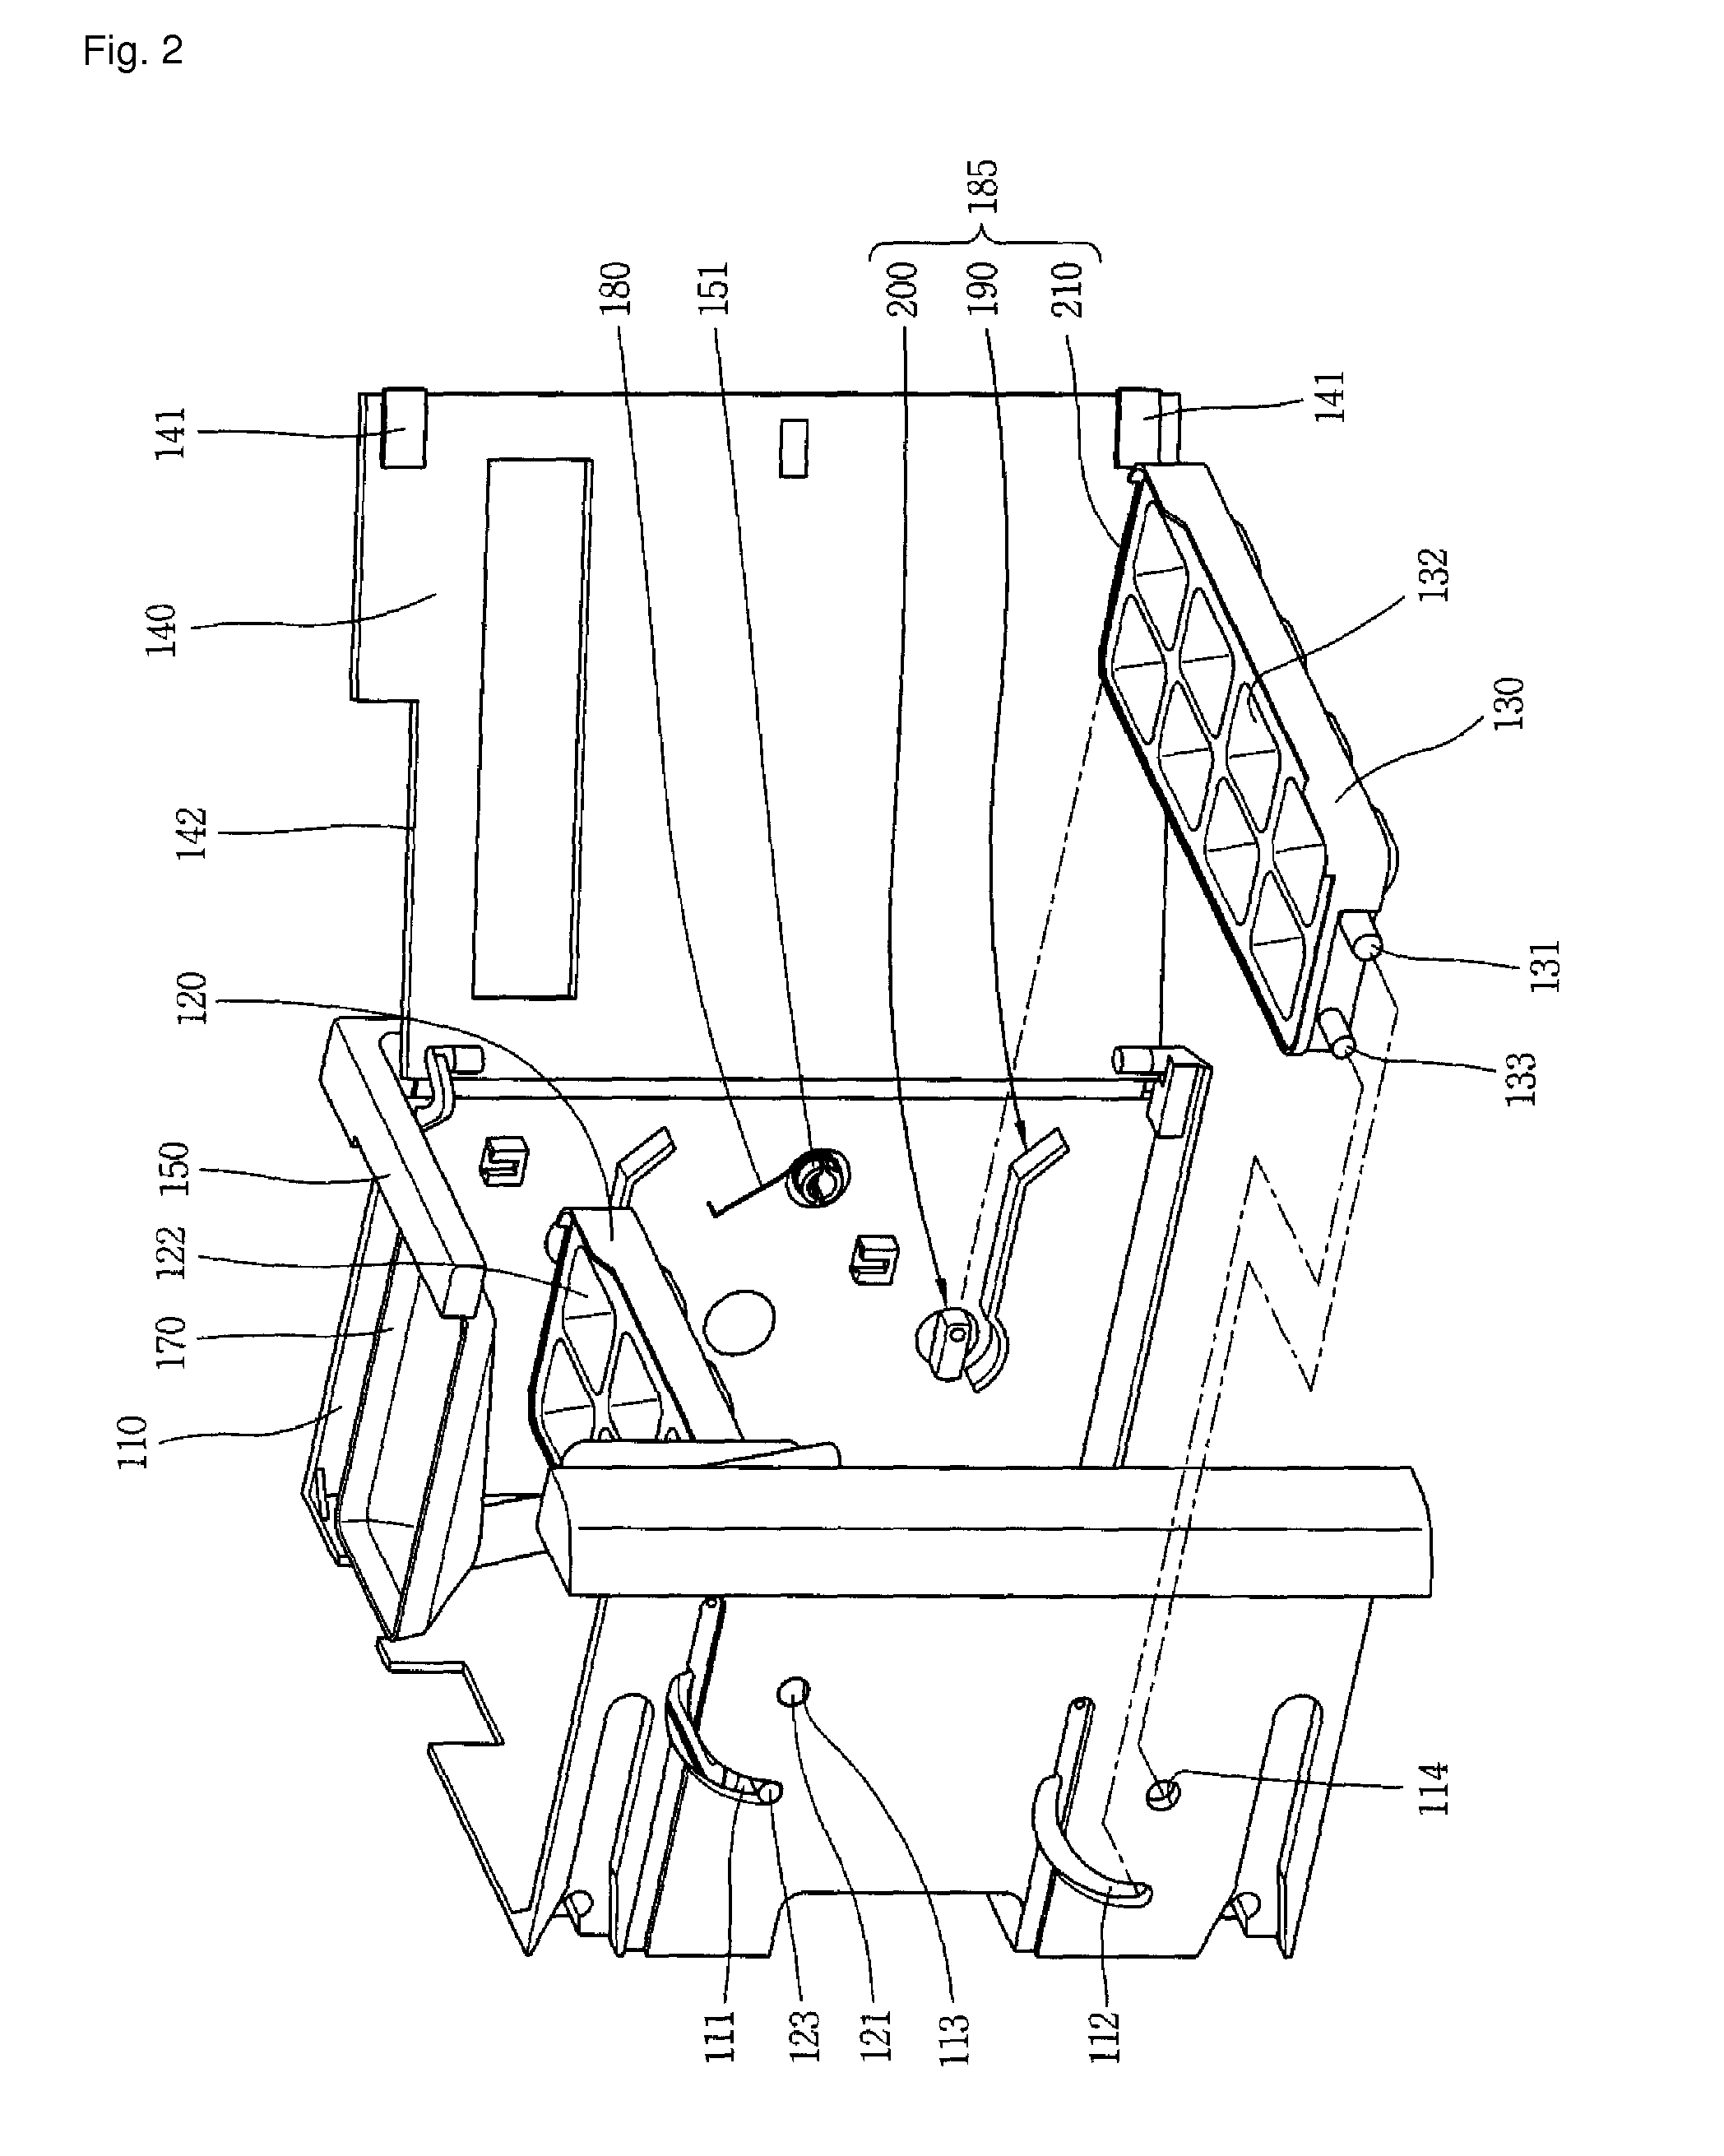 Ice making apparatus for refrigerator